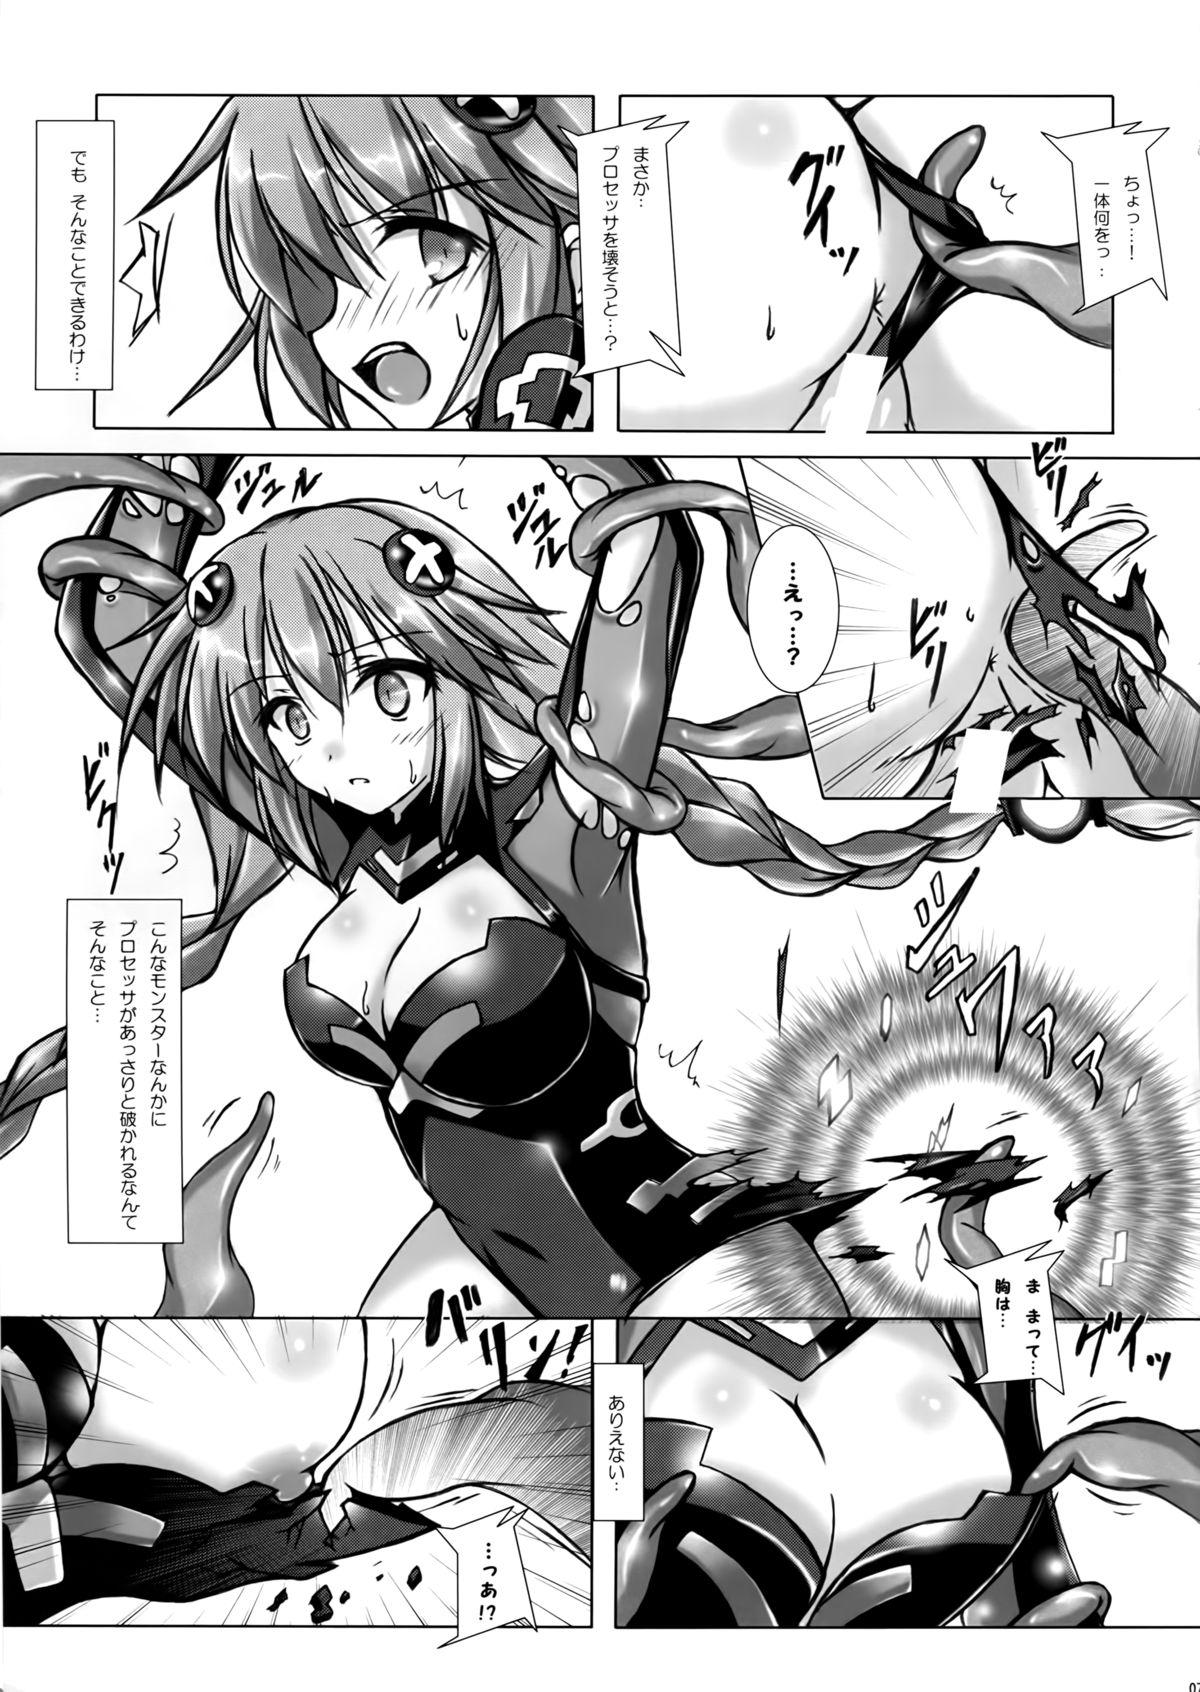 Amature Tentacle Syndrome - Hyperdimension neptunia Super Hot Porn - Page 7